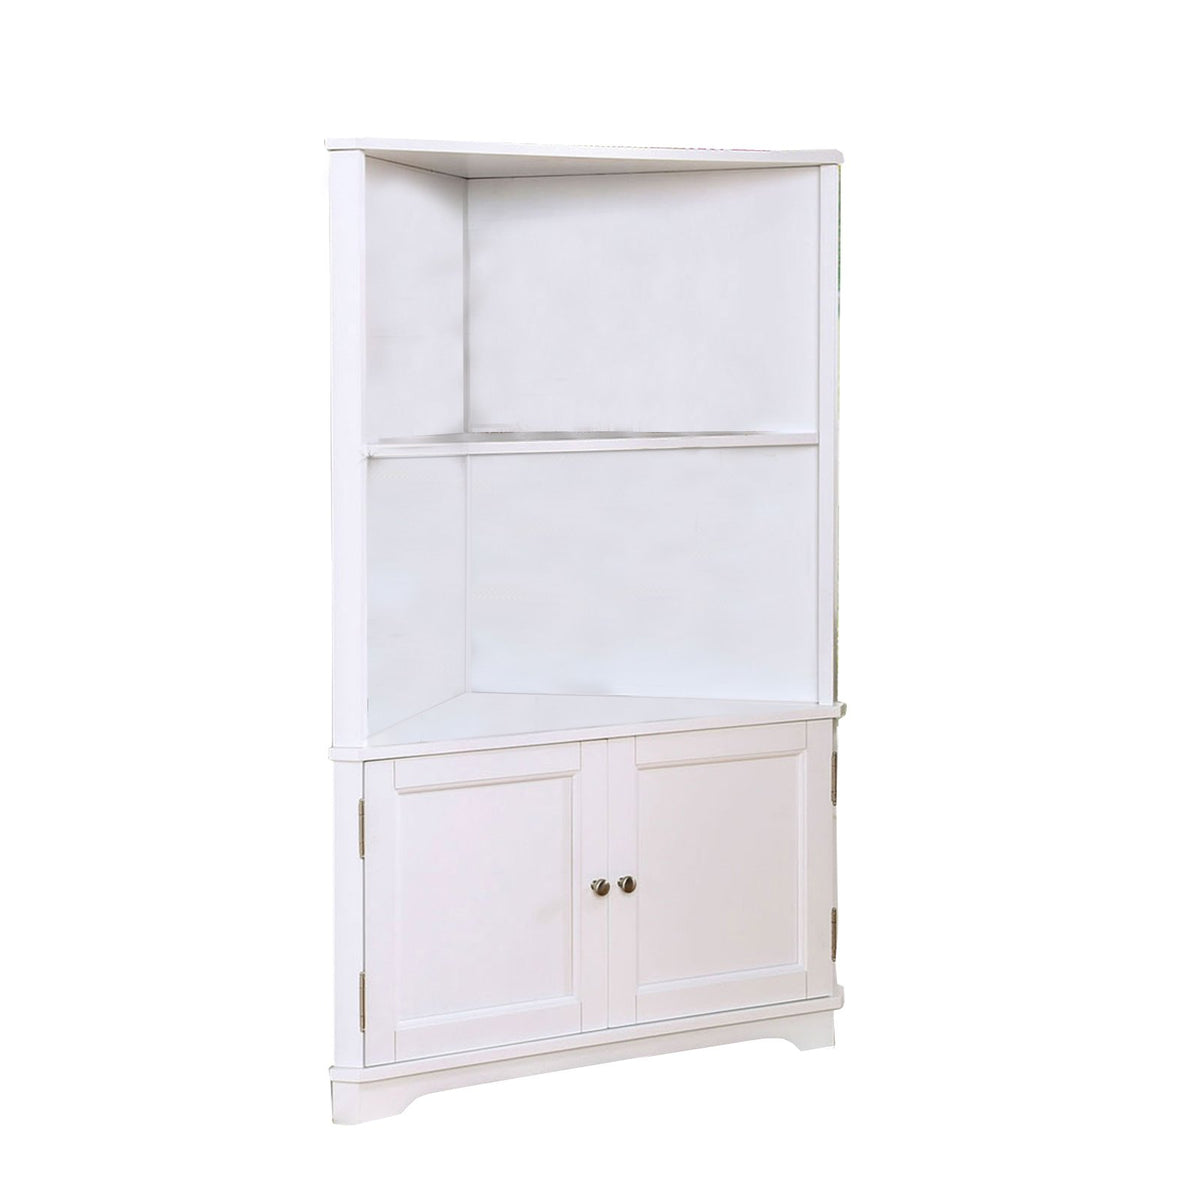 Wooden Bookshelf with 2 Open Compartments and 2 Doors in White - BM206245